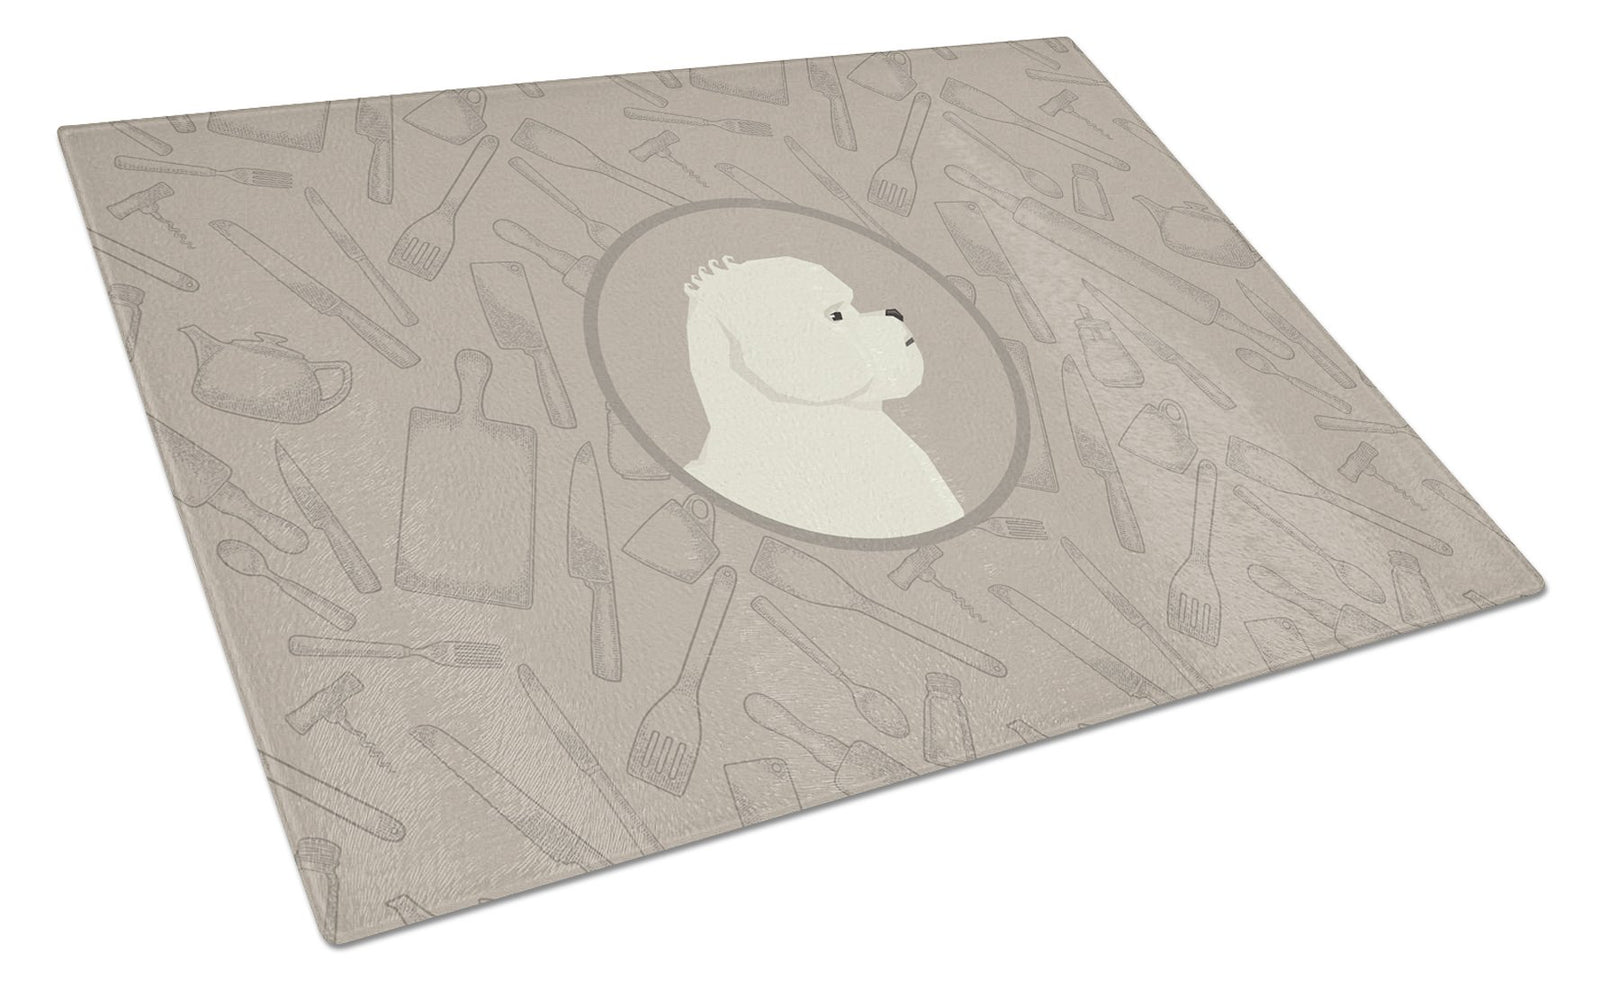 Bichon Frise In the Kitchen Glass Cutting Board Large CK2168LCB by Caroline's Treasures